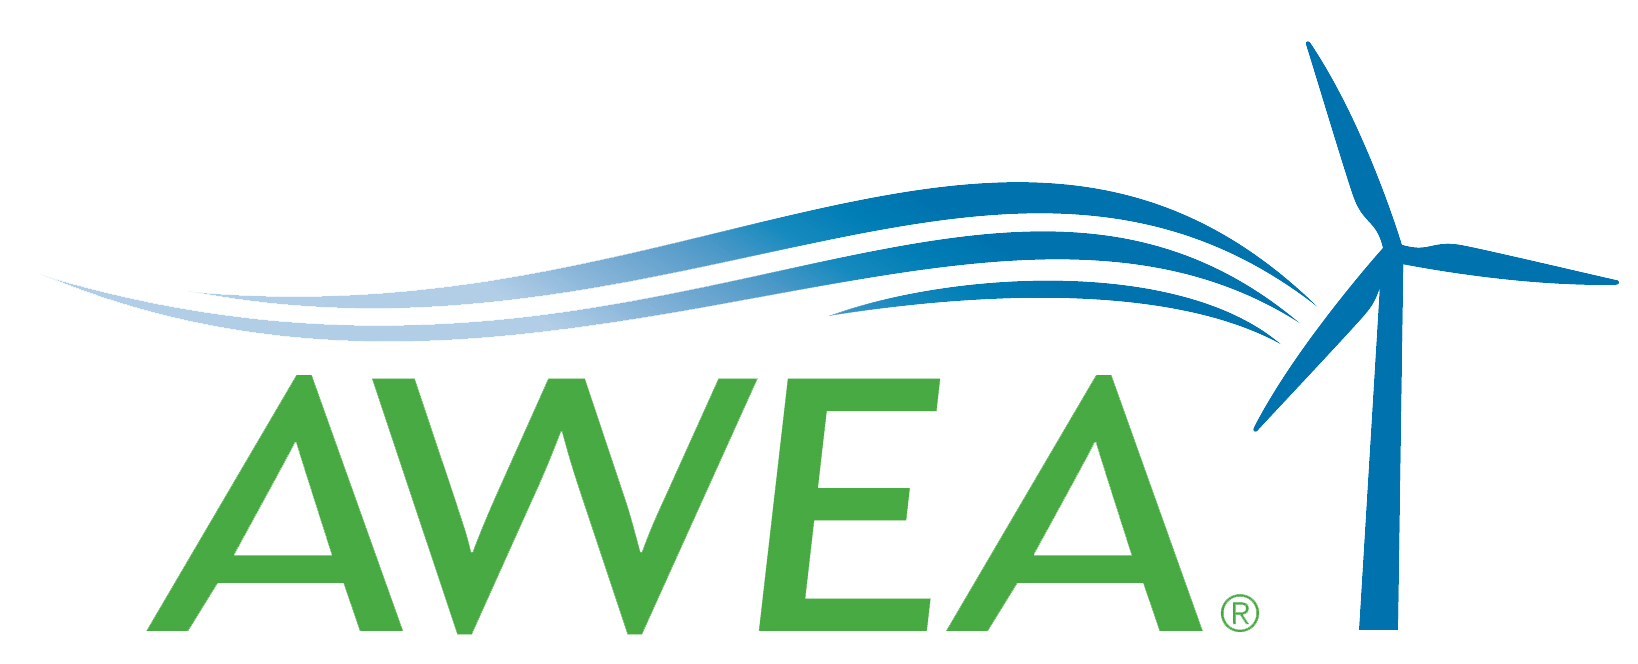 Columbia Safety & Supply is a proud member of AWEA (the American Wind Energy Association